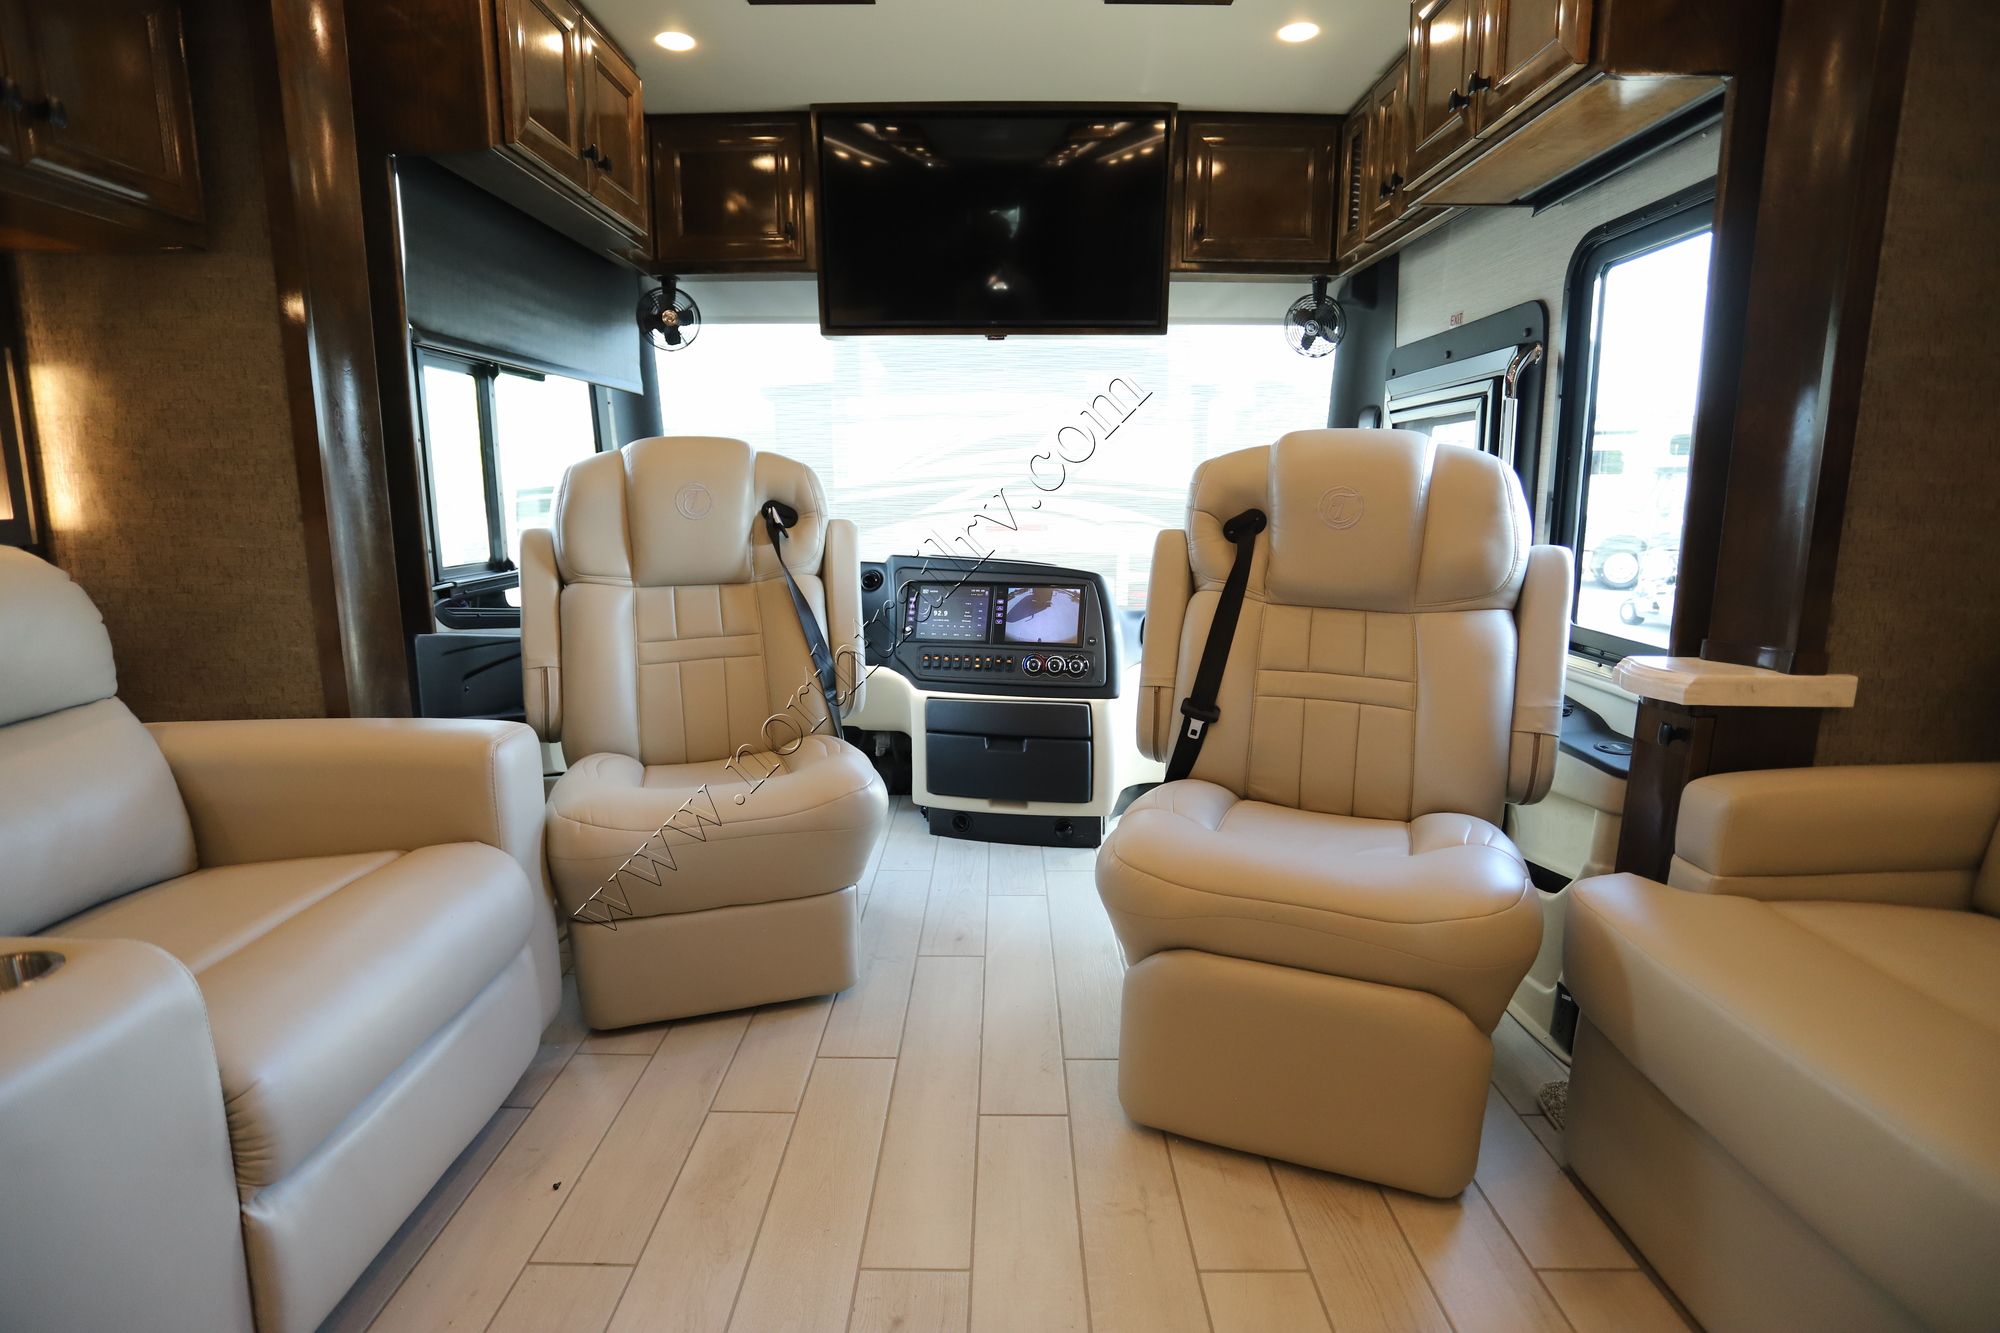 New 2022 Tiffin Motor Homes Allegro Bus 40IP Class A  For Sale